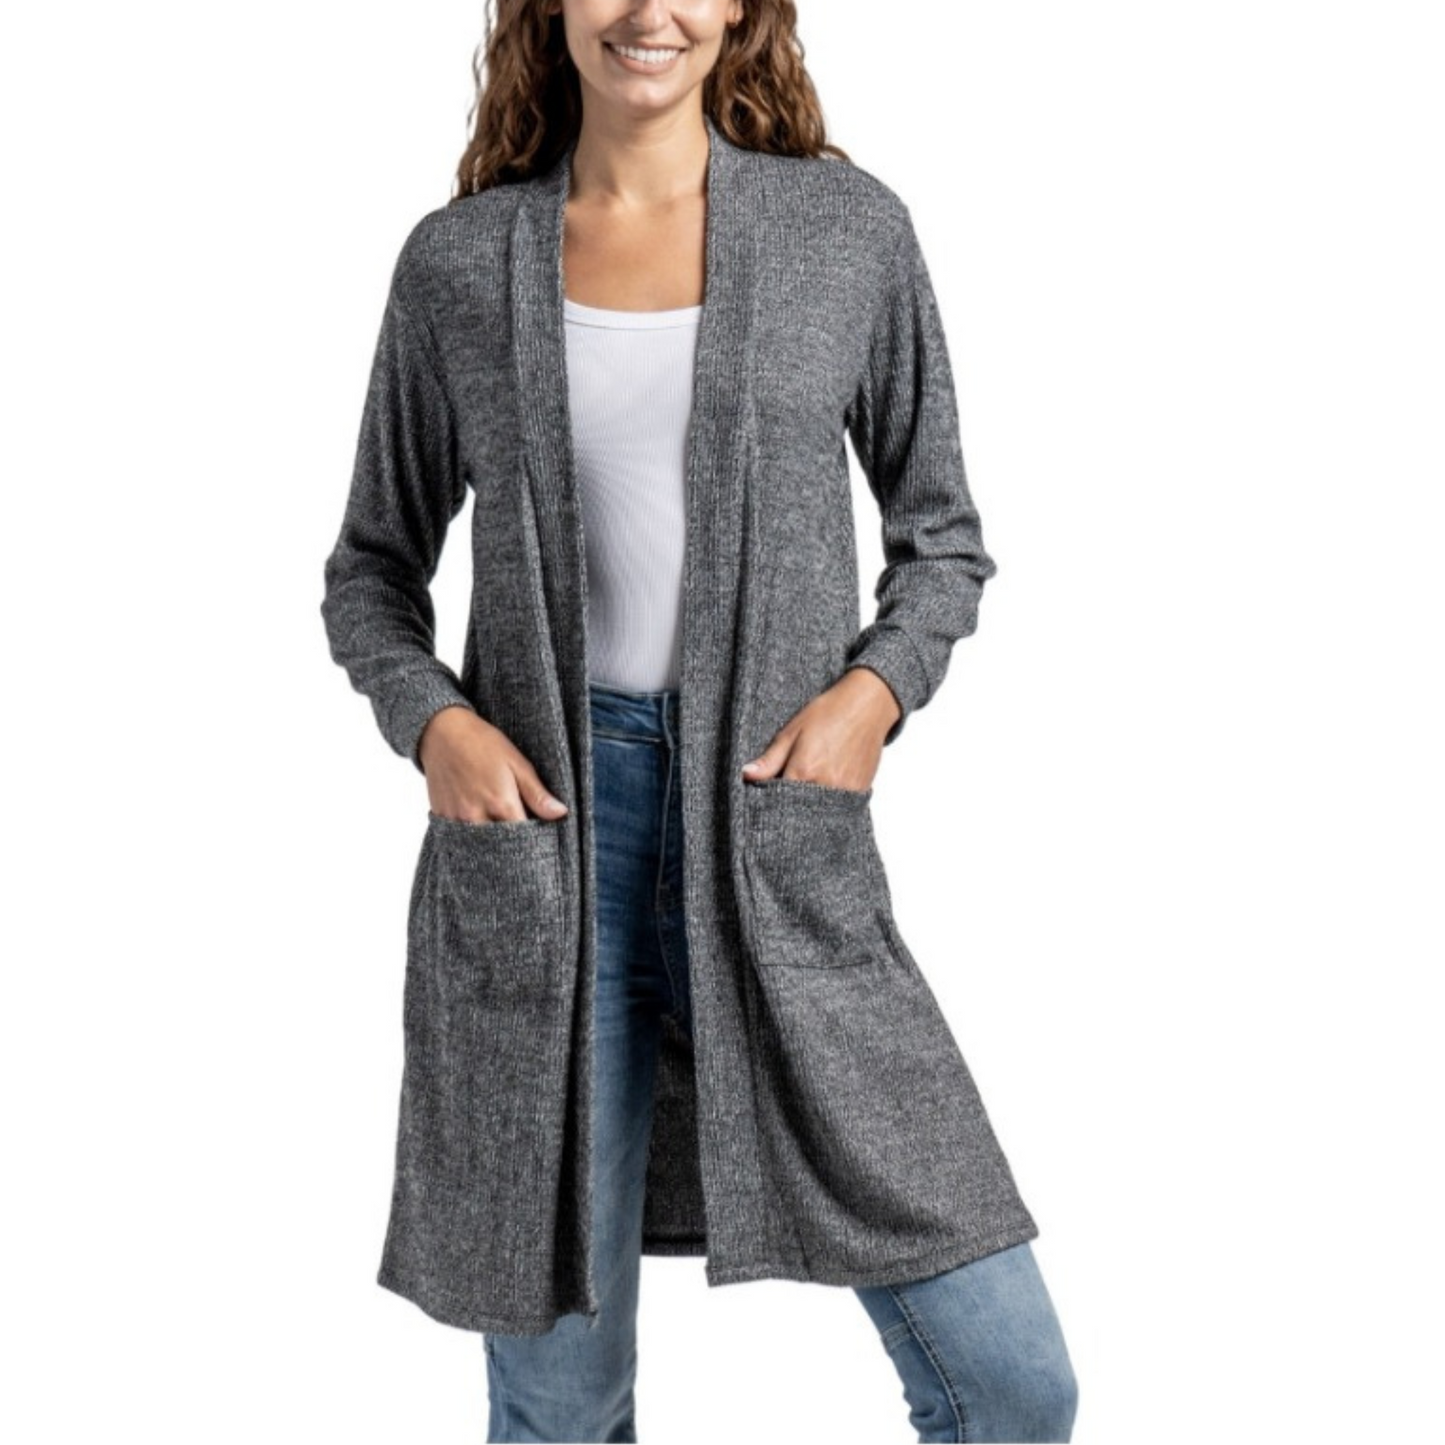 Our Cuddle Blend Cardigan is both comfortable and stylish. The Cuddle Blend Cardigan is crafted with a dreamy, soft fabric and available in pink and grey. Pair it with the matching tank and pants for the ultimate loungewear look.